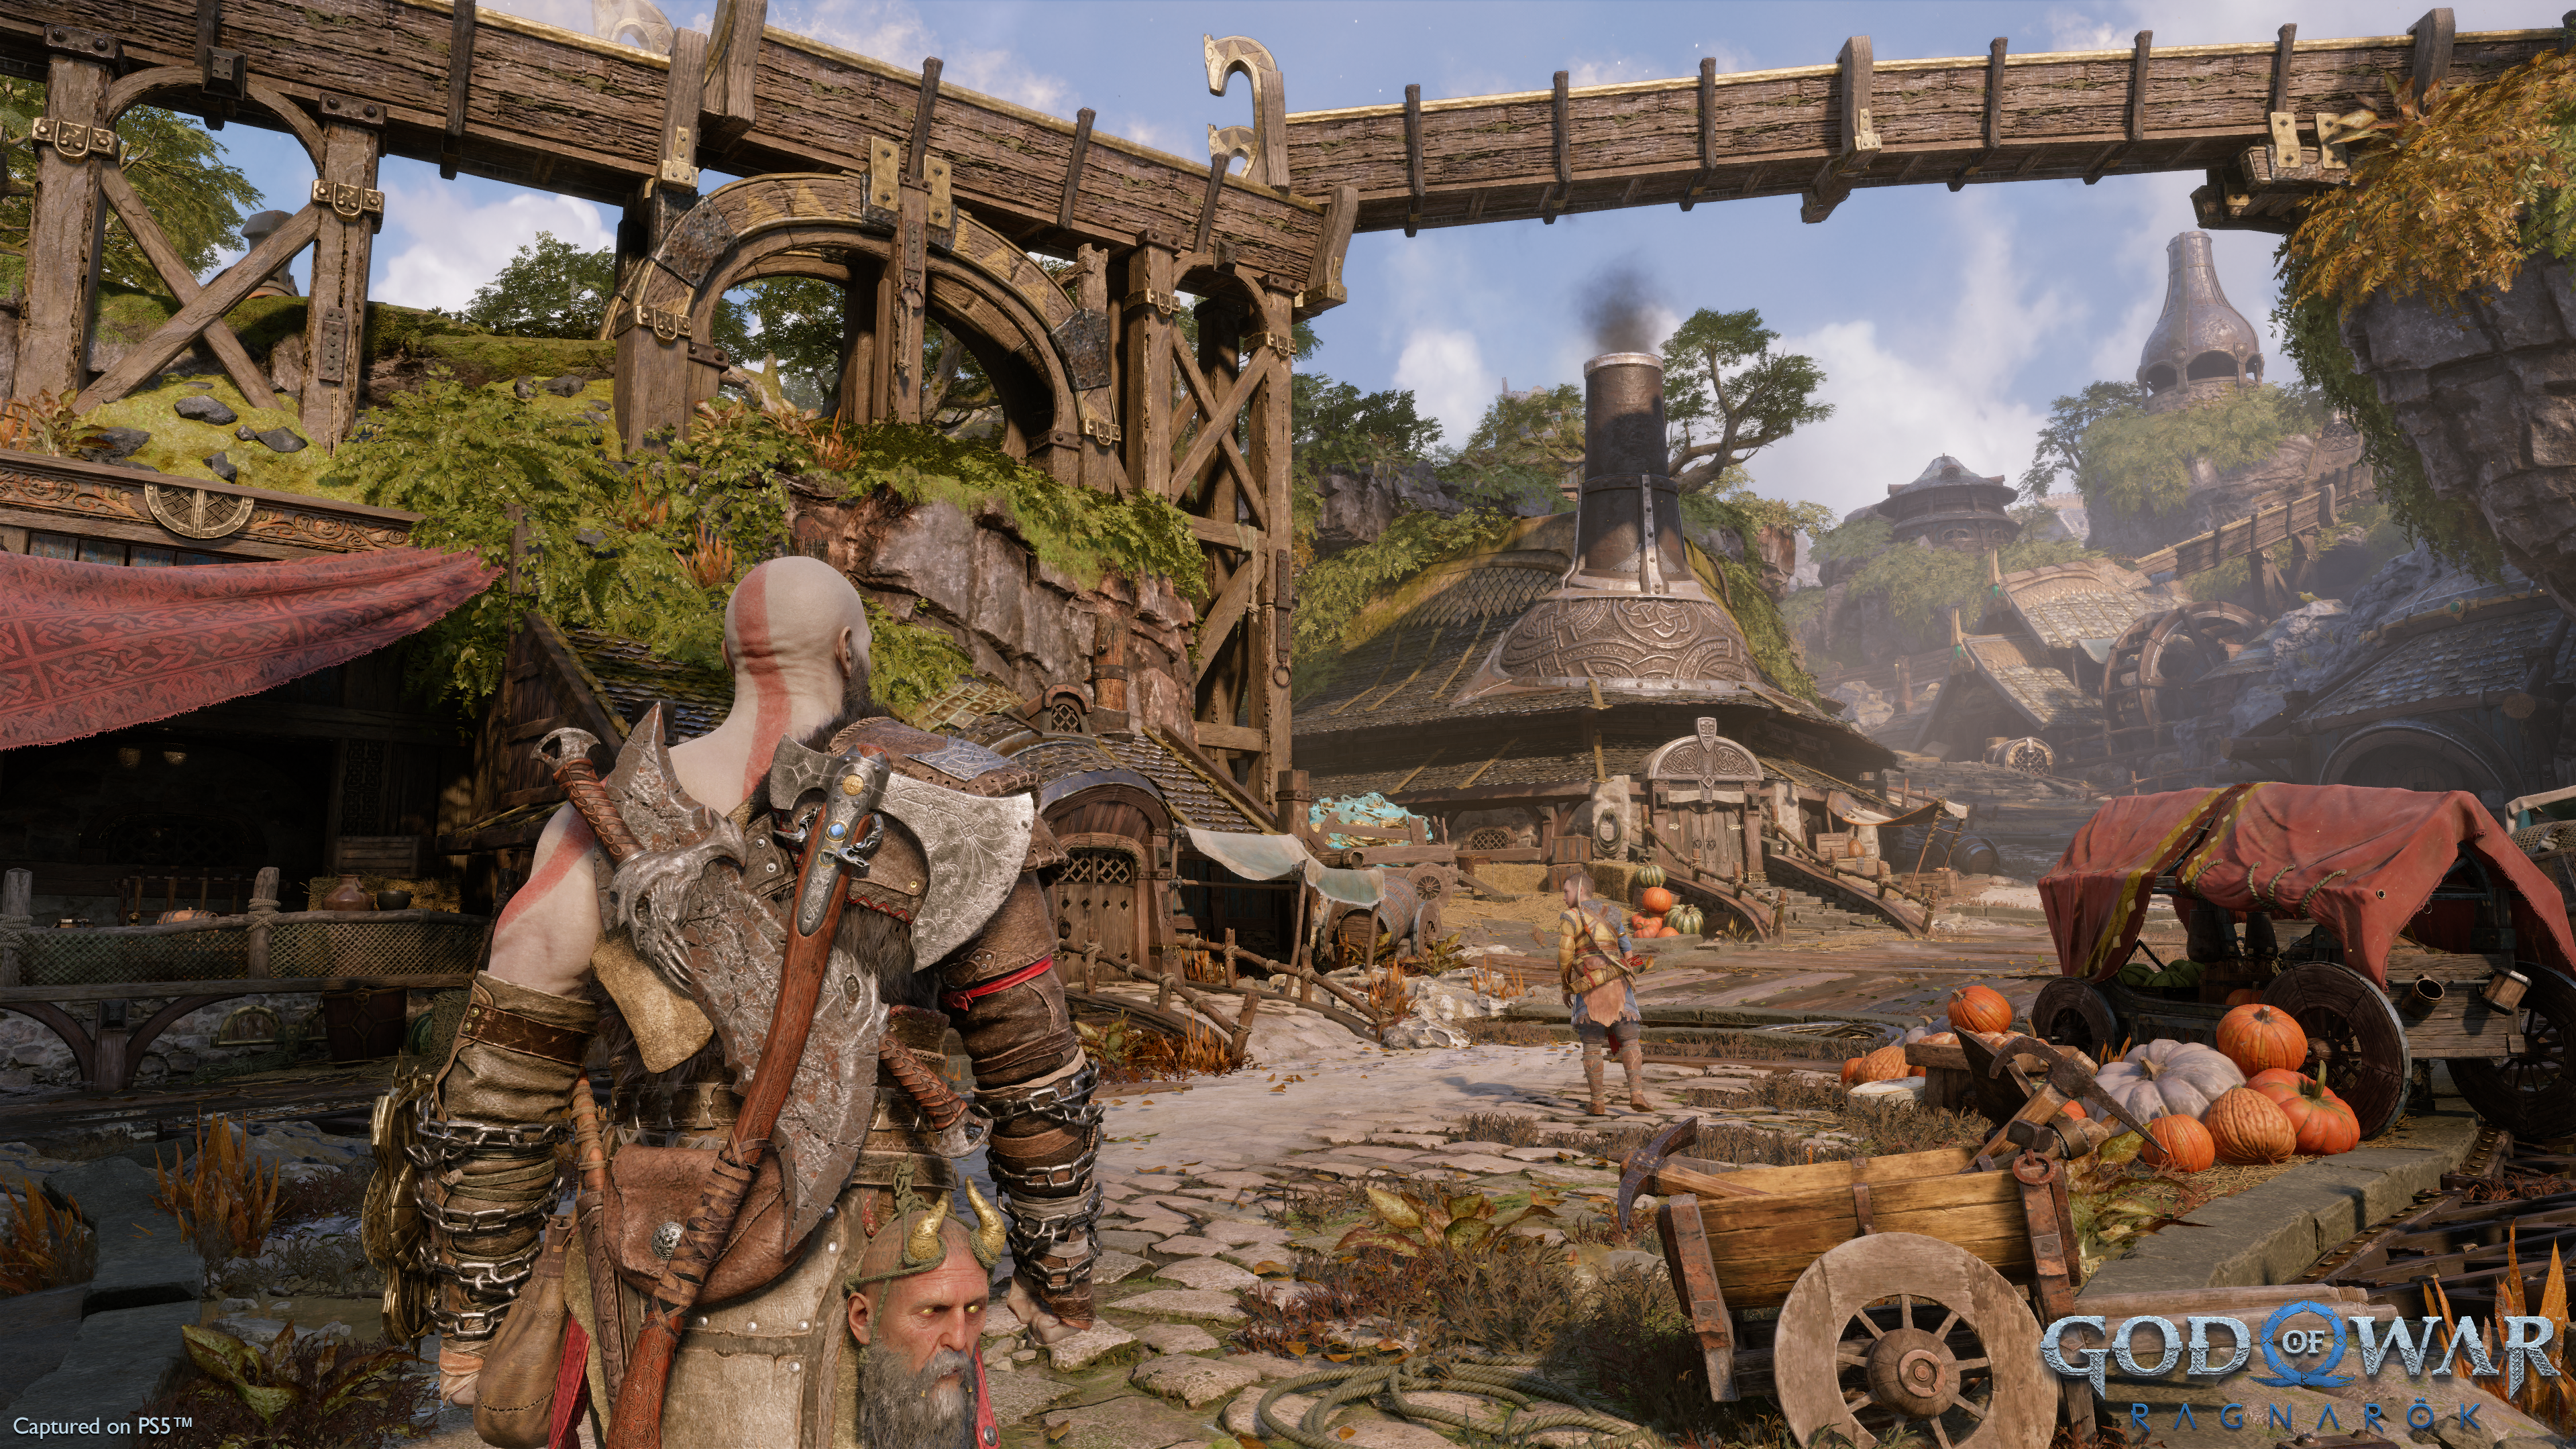 God of War preview - Kratos enters a kind of rural town in the Dwarf realm.